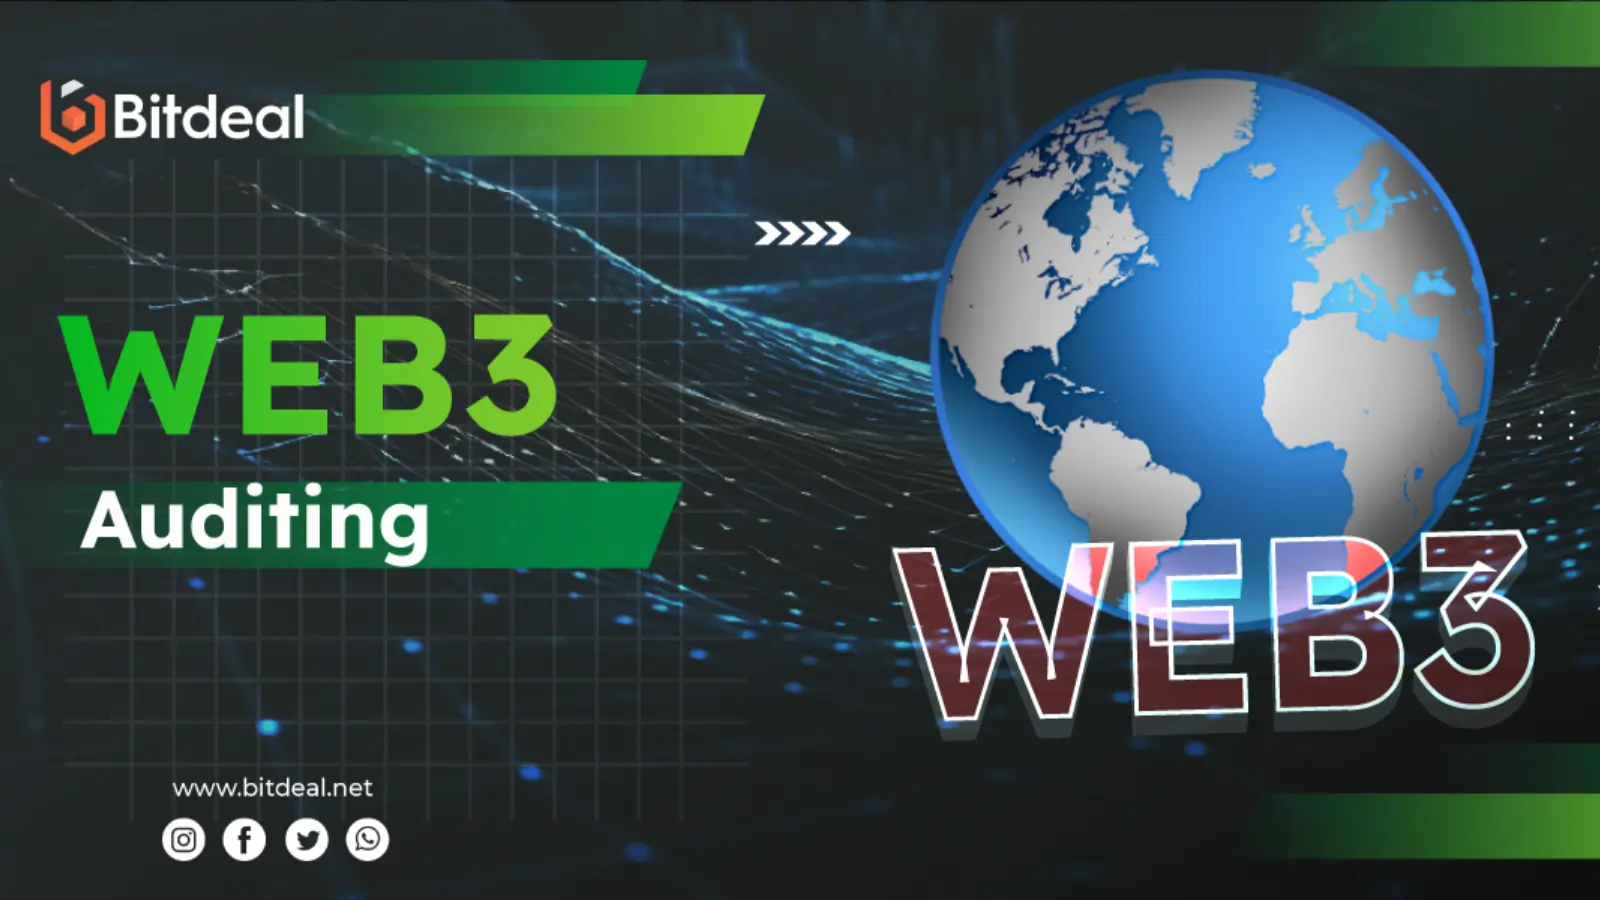 Empower Your Web3 Auditing Journey With Bitdeal’s Web3 Auditing Services